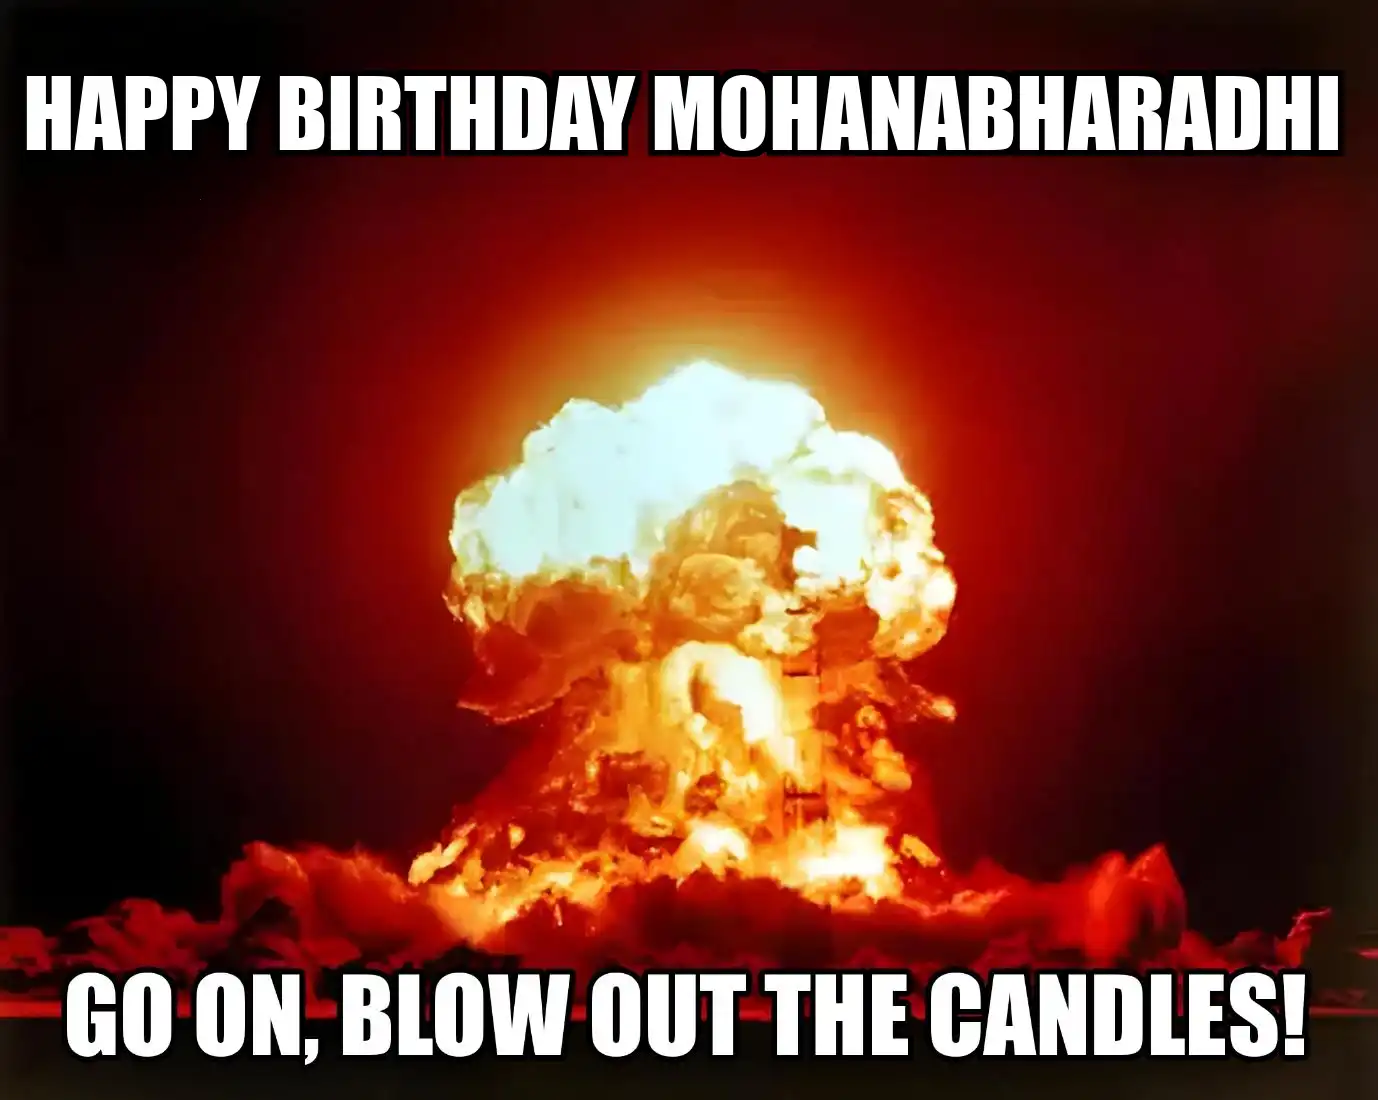 Happy Birthday Mohanabharadhi Go On Blow Out The Candles Meme